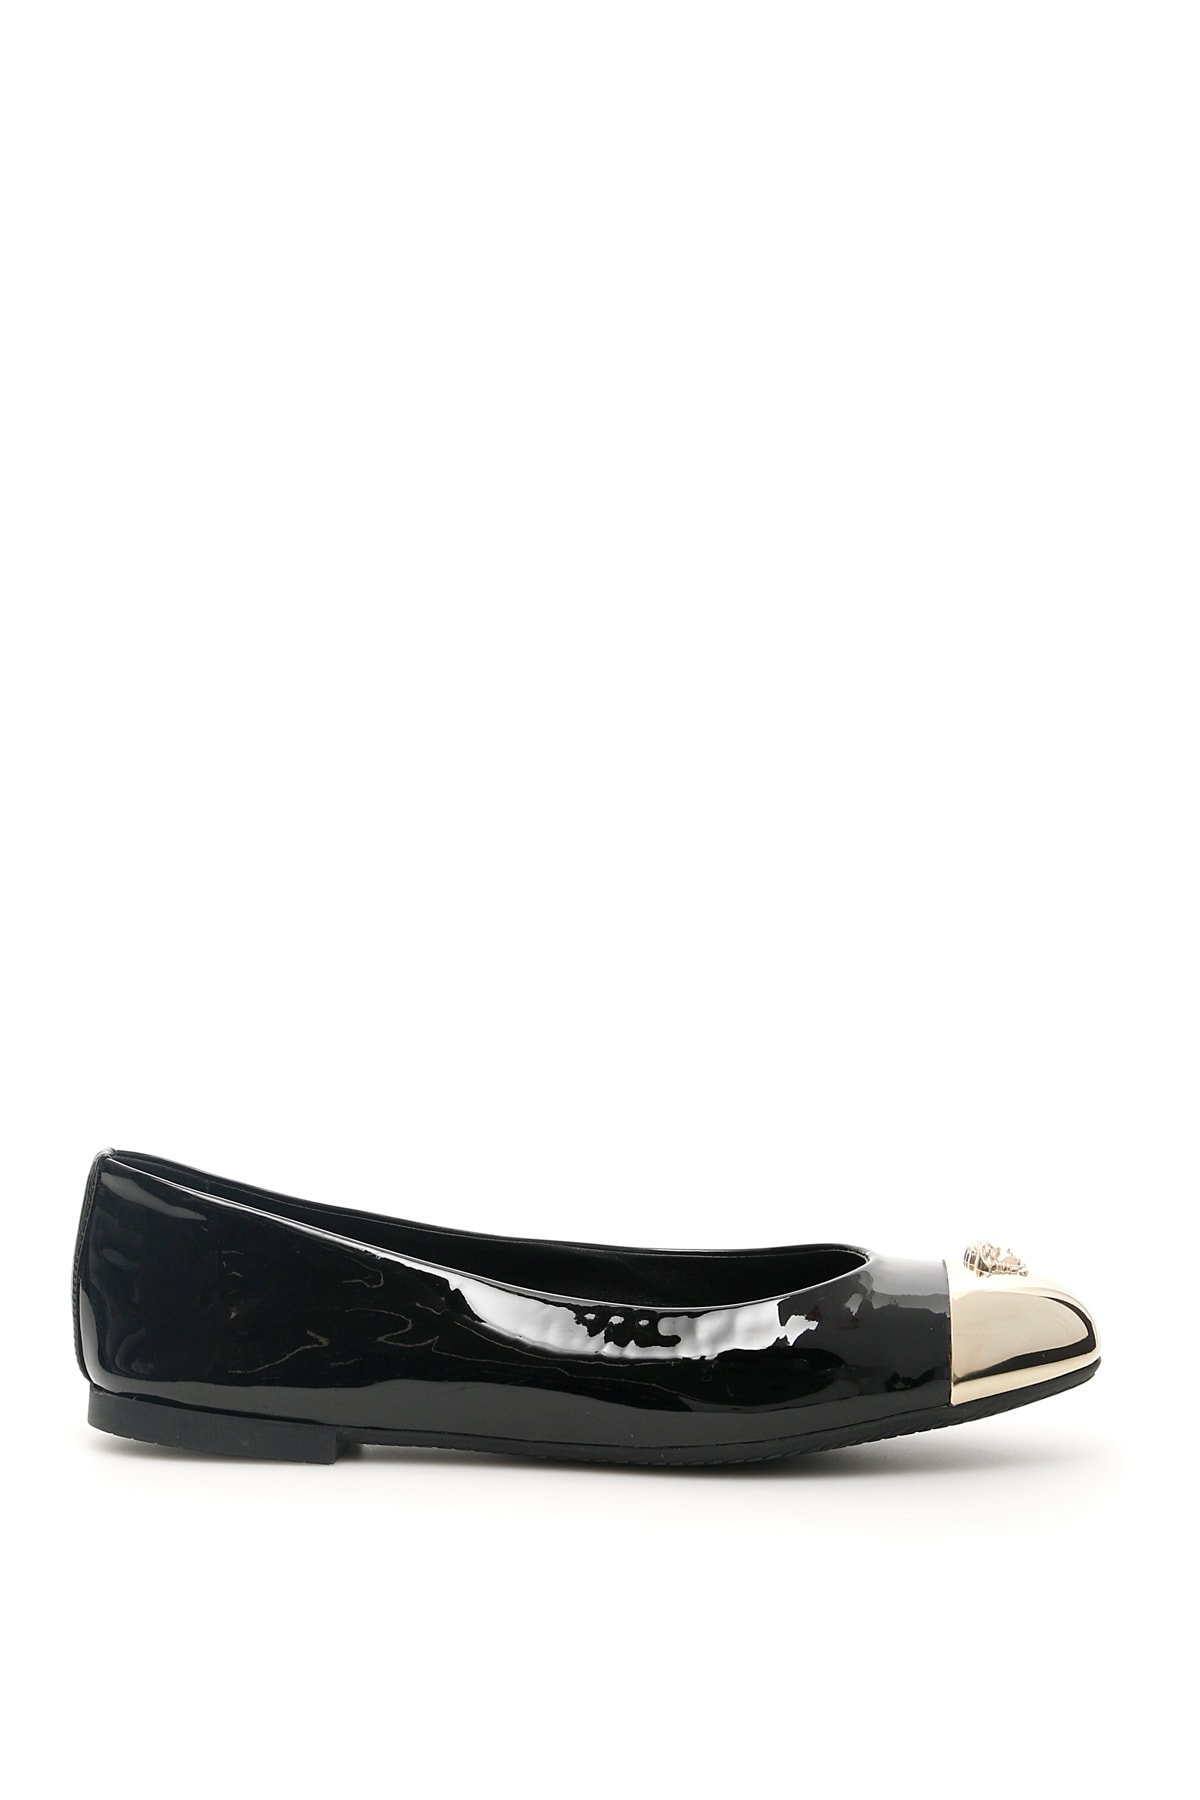 Buy Versace Medusa Ballerinas online, shop Versace shoes with free shipping